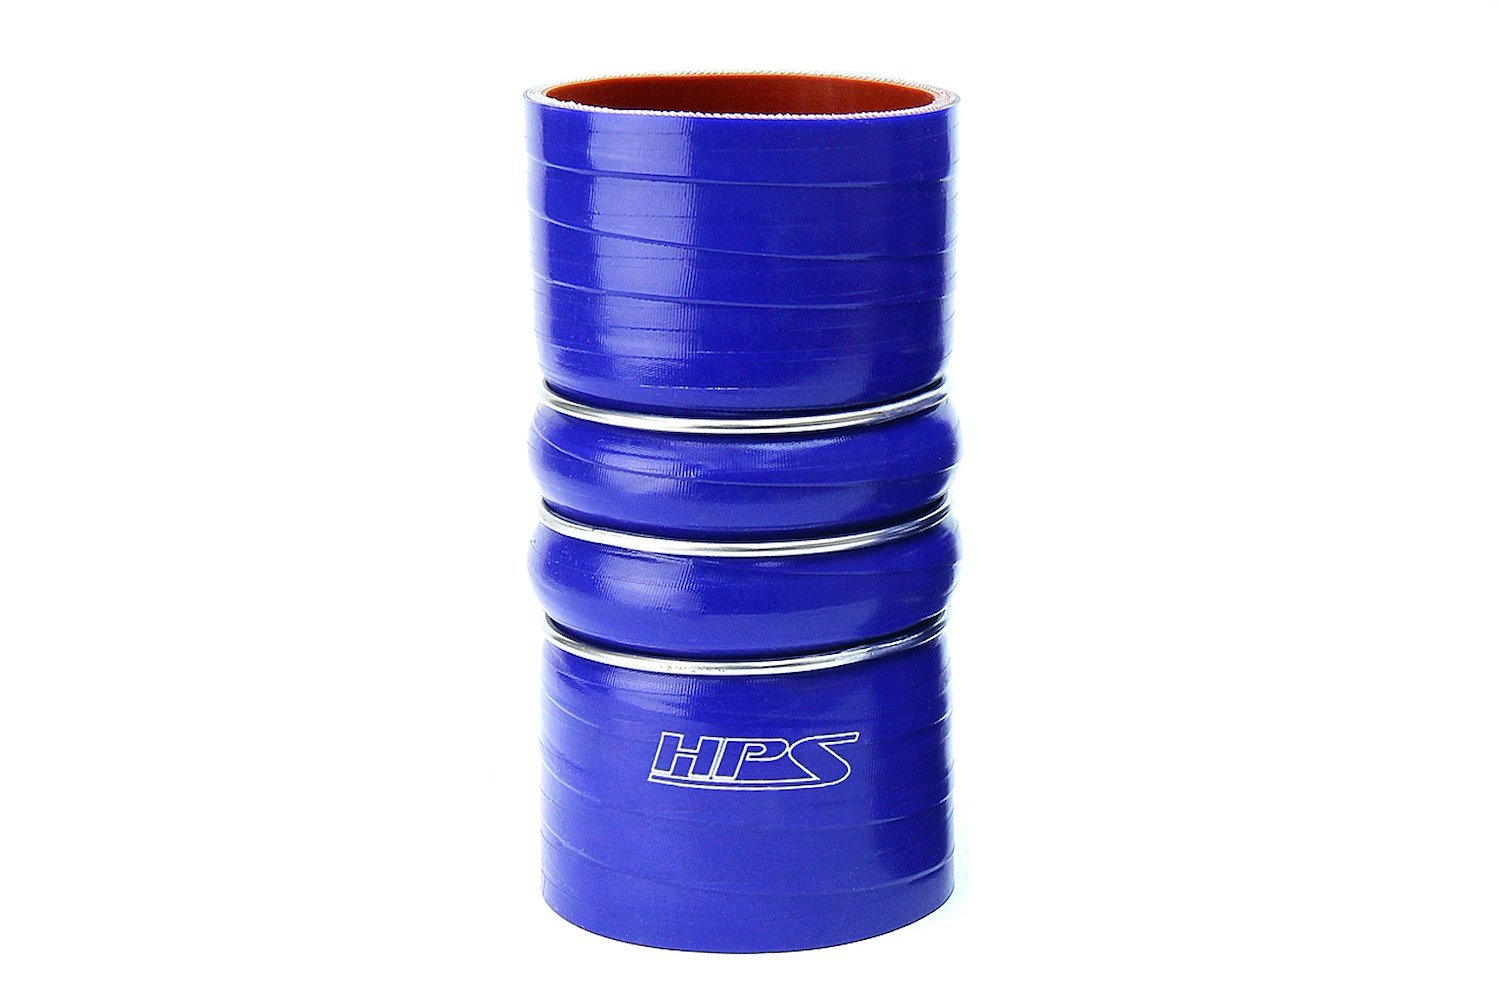 CAC-200-COLD Silicone CAC Hose, Silicone CAC Hump Coupler Hose Cold, High-Temp 4-Ply Reinforced, 2 in. ID, 6 in. Long